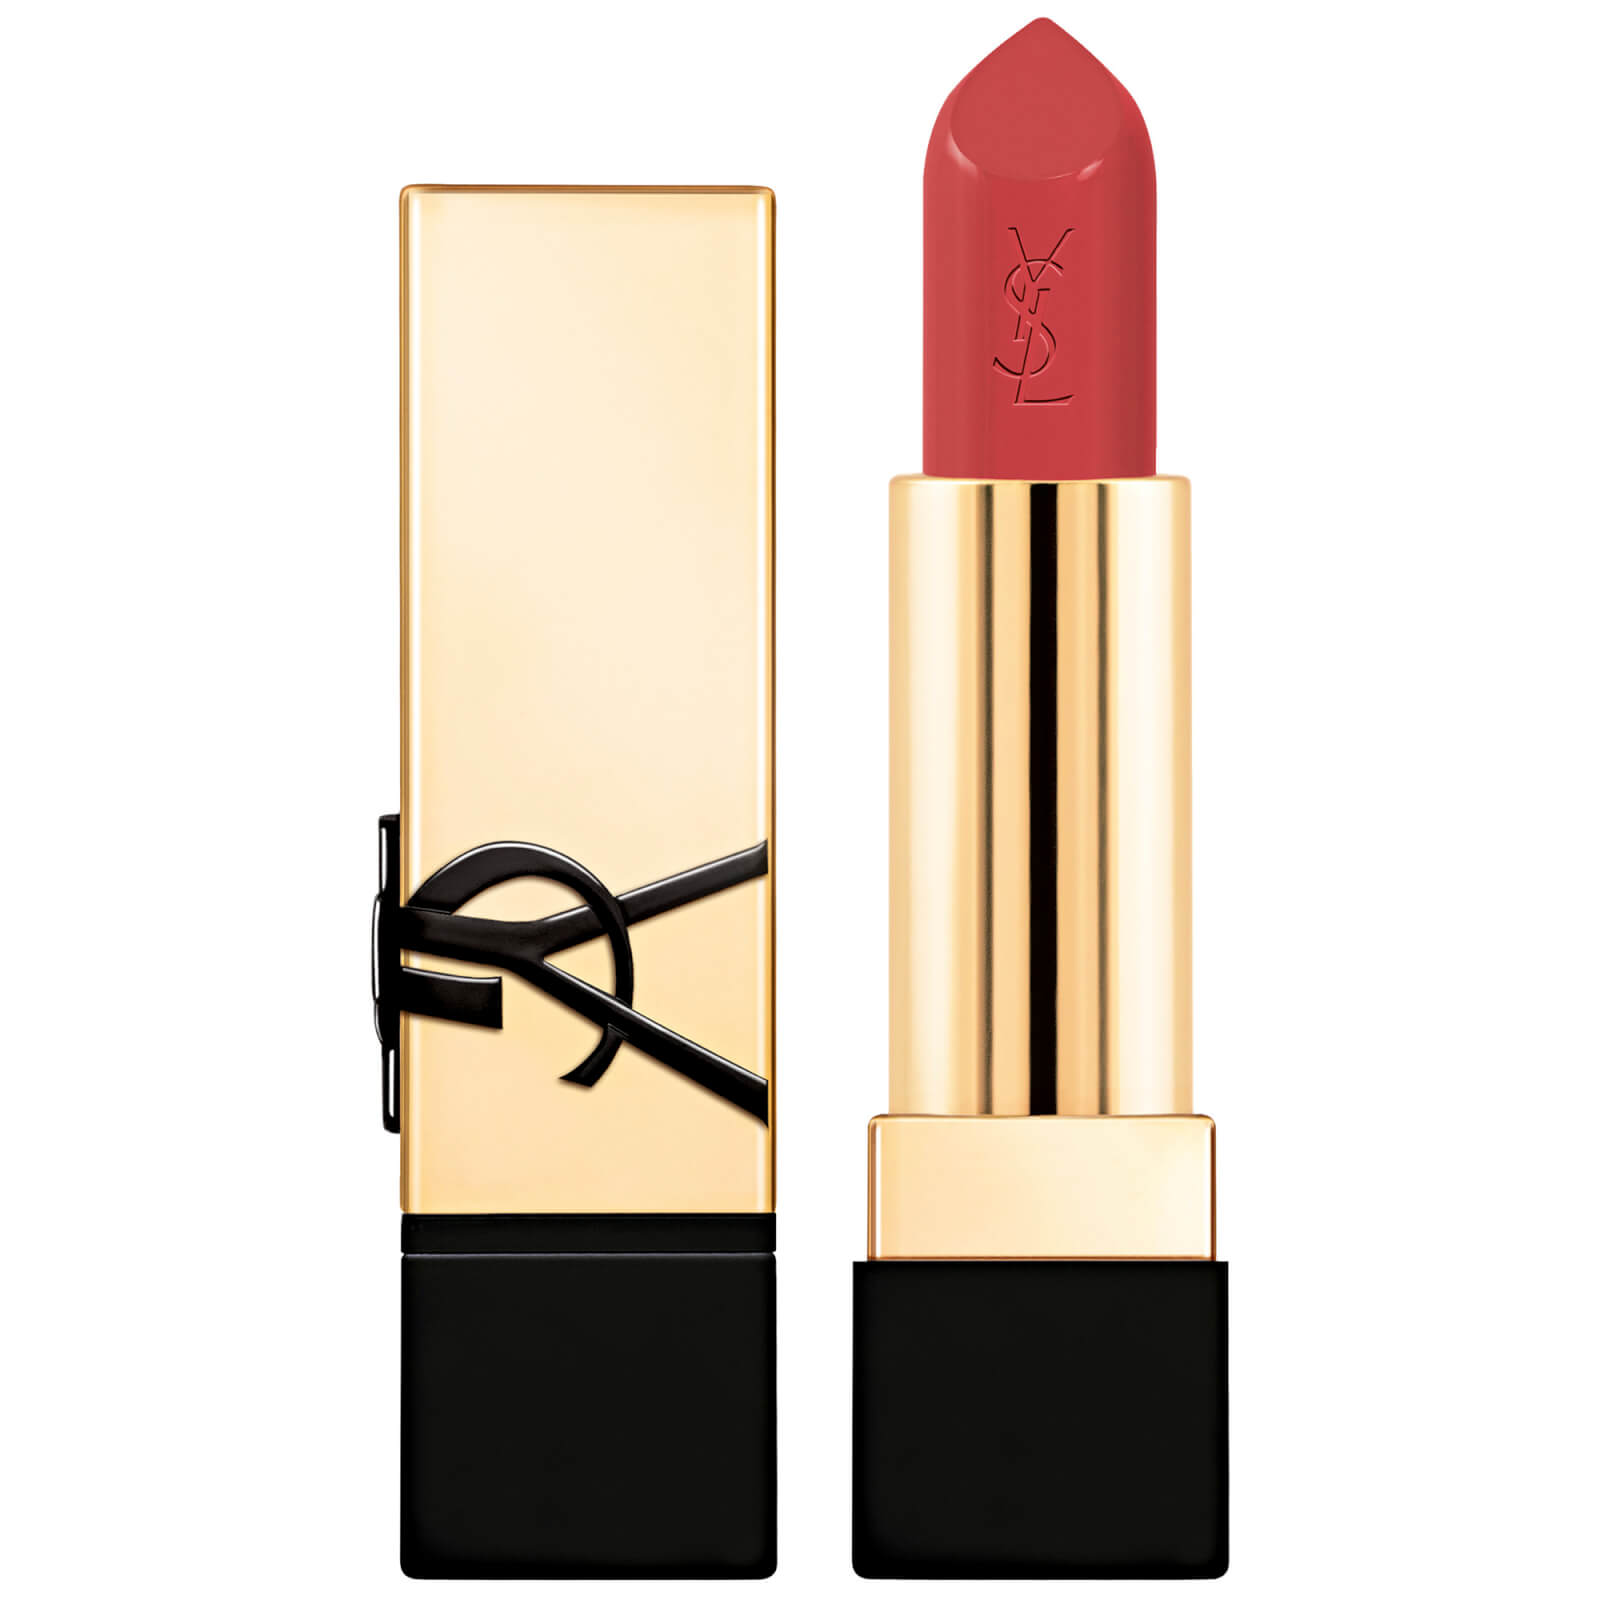 Ysl Yves Saint Laurent Rouge Pur Couture Renovation Lipstick 3g (various Shades) - N7